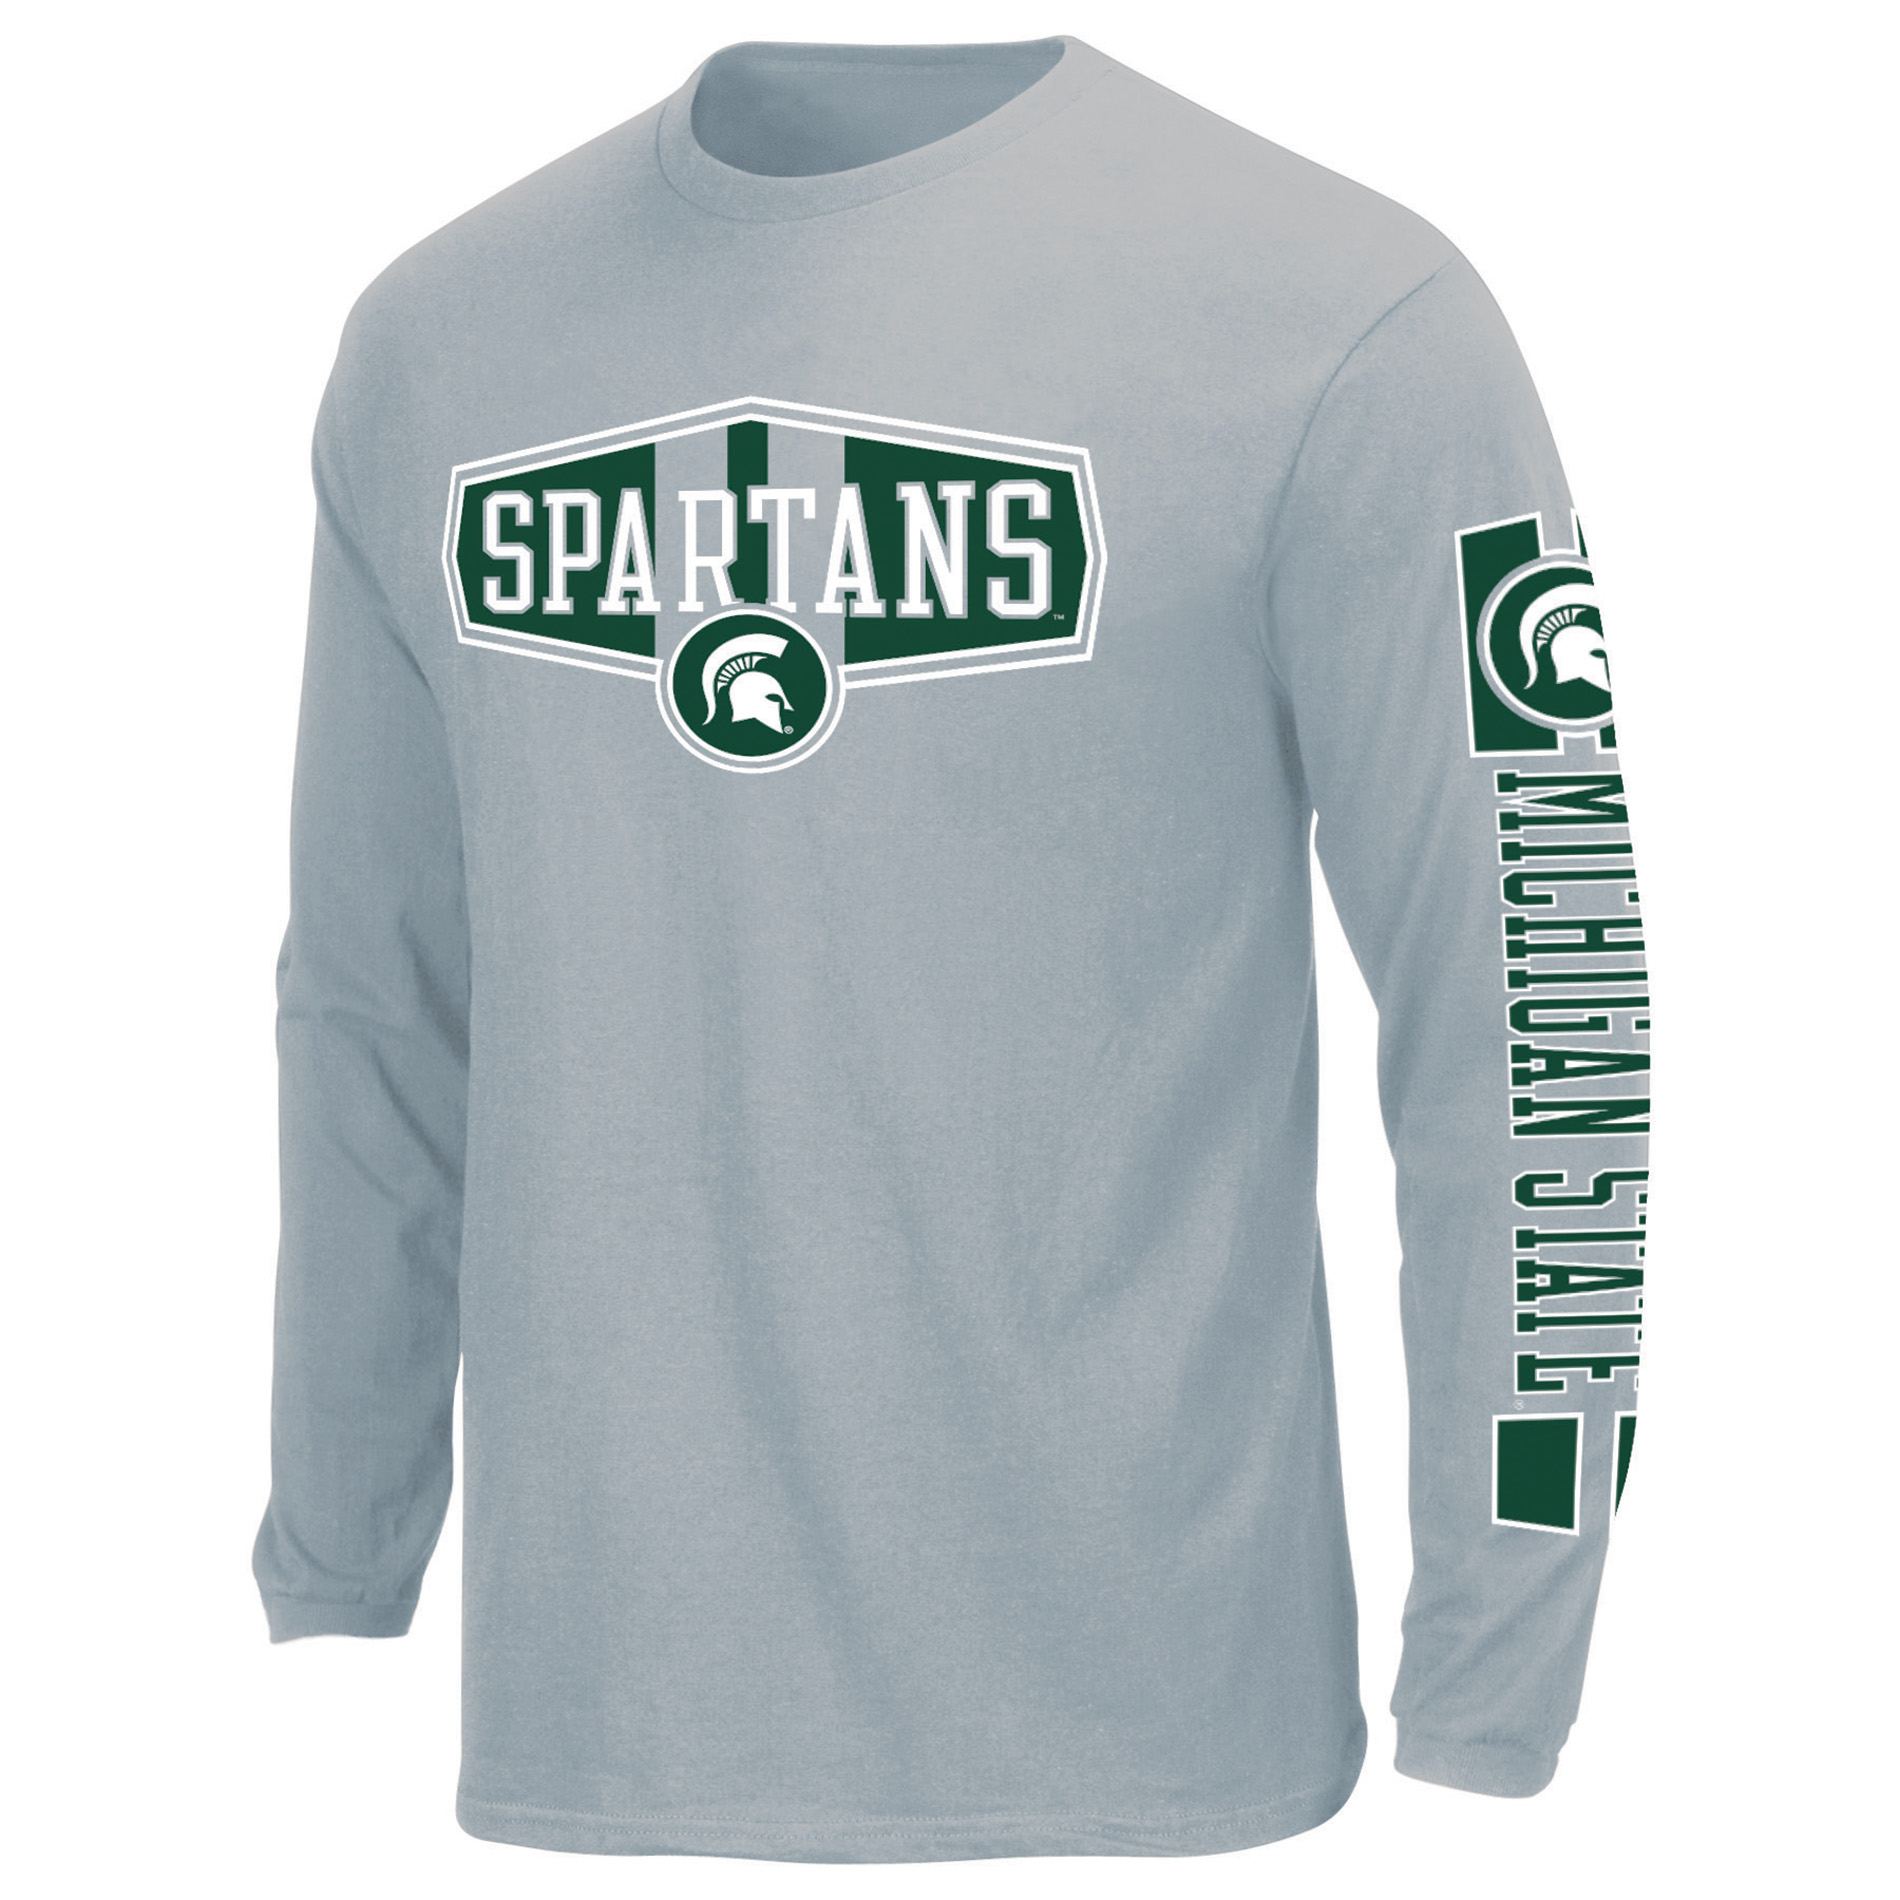 NCAA Men’s Michigan State Spartans Long-Sleeve Graphic T-Shirt